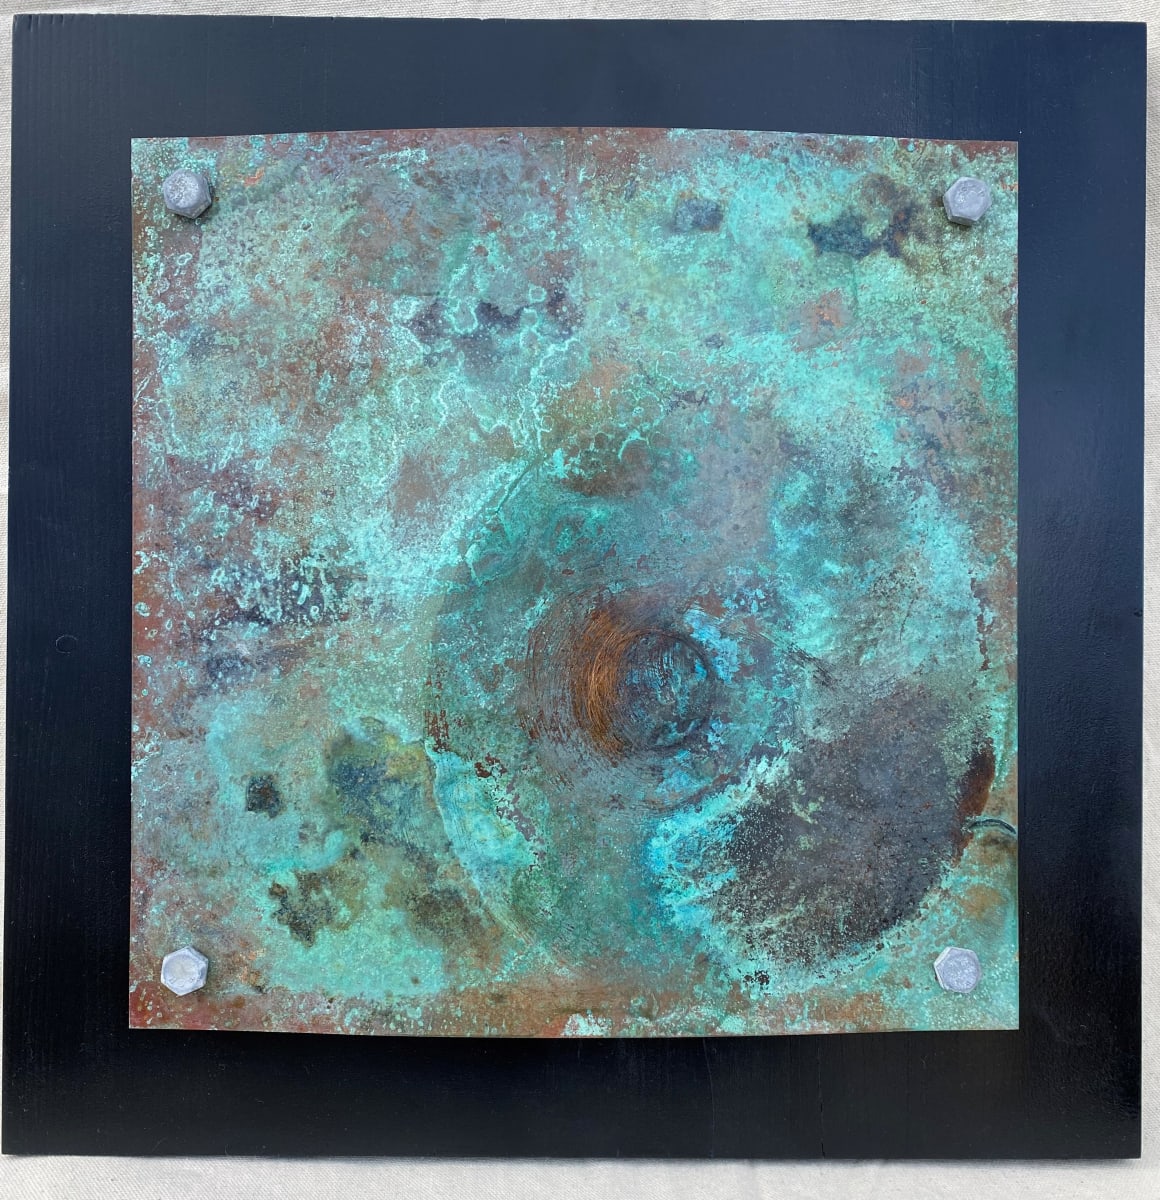 Sphere by Heather Duris  Image: Acid Etched copper plate mounted on wood board with steel bolts.